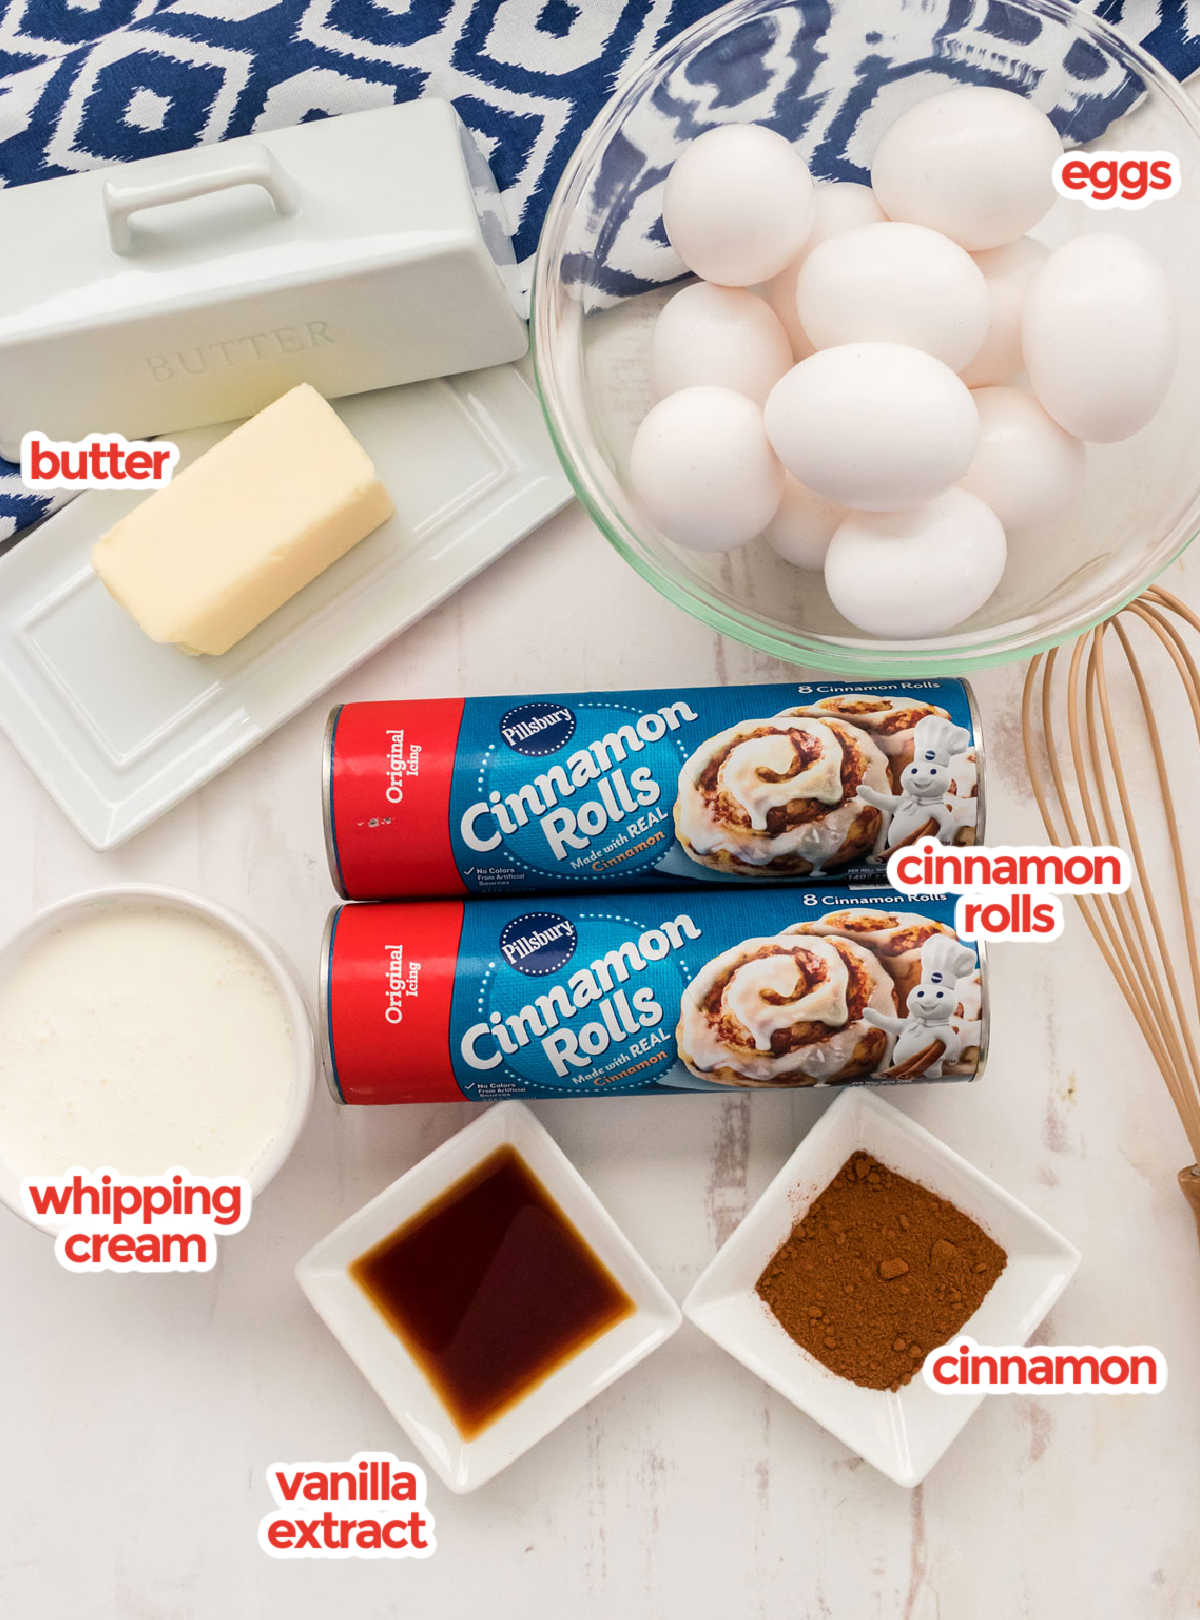 All the ingredients need to make Cinnamon Roll Breakfast Casserole including canned cinnamon rolls, eggs, butter, vanilla, cream and cinnamon.